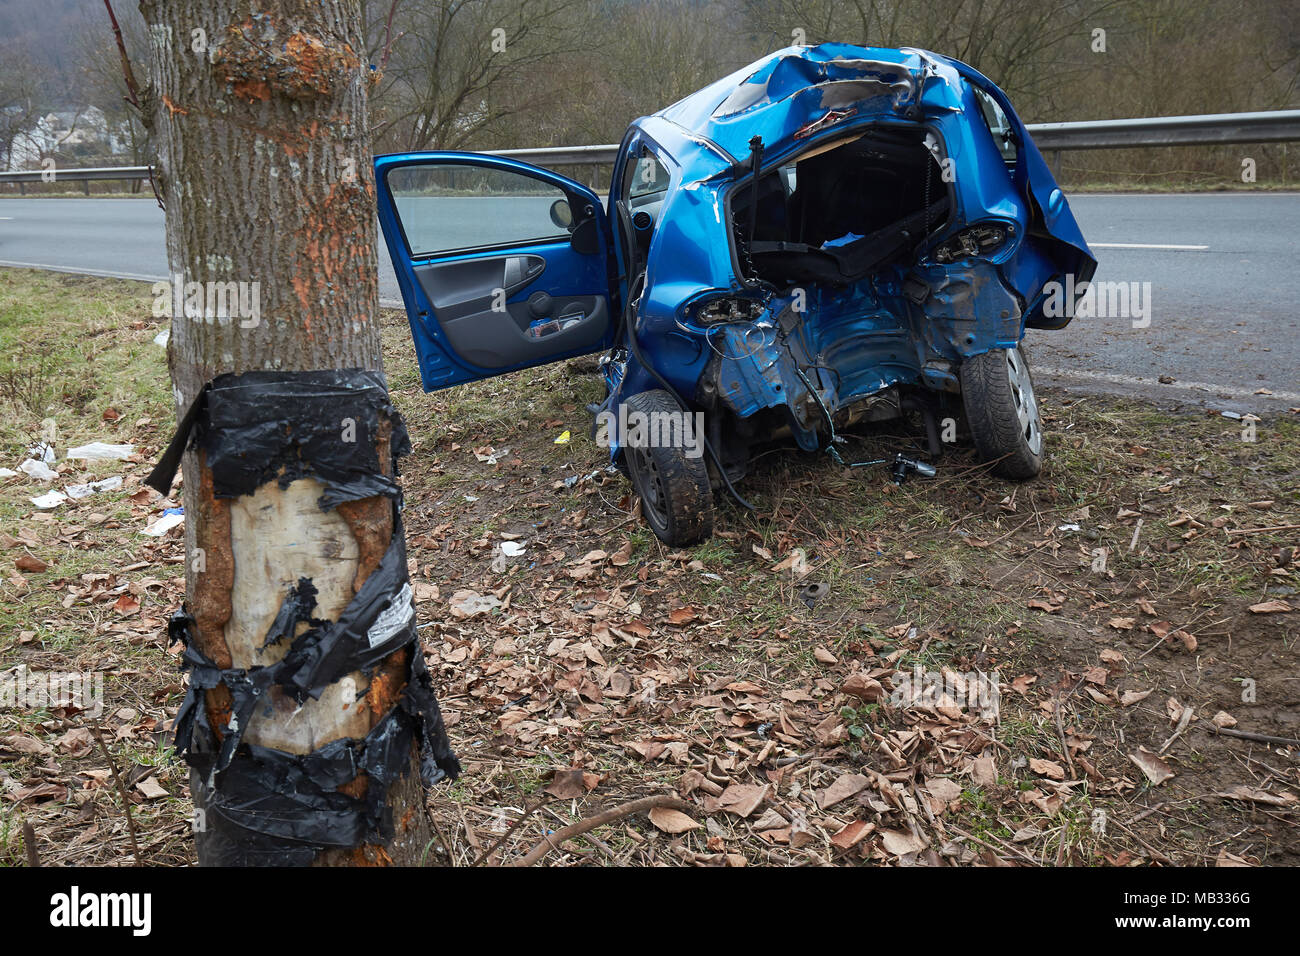 Car accident on country road, car with rear peprallt against a tree, Germany Stock Photo